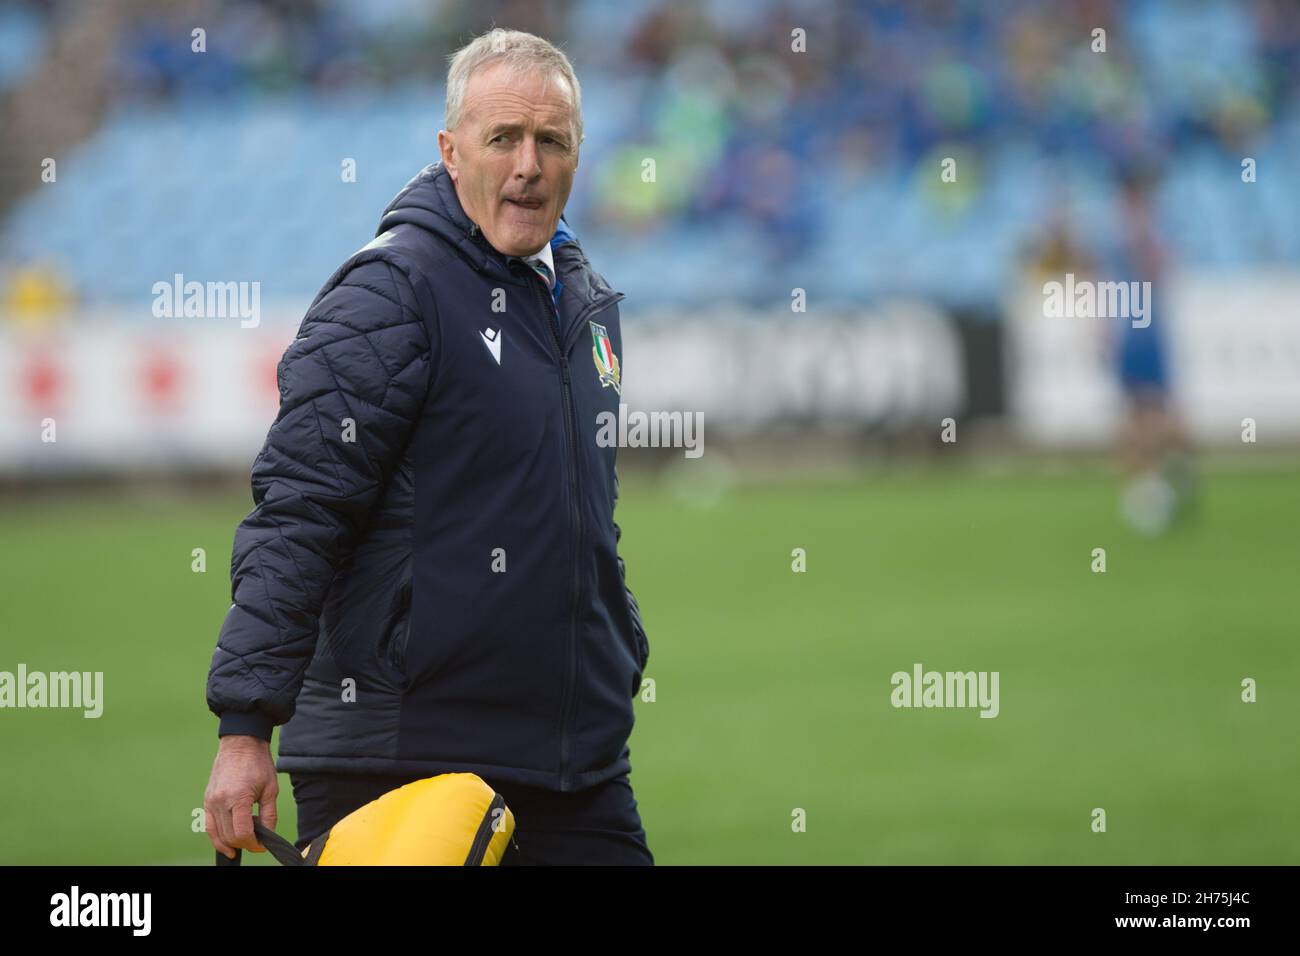 Sergio Lanfranchi stadium, Parma, Italy, November 20, 2021, Head Coach Kieran Crowley (Italy)   during  Test match 2021 - Italy vs Uruguay  - Autumn Nations Series rugby match Credit: Live Media Publishing Group/Alamy Live News Stock Photo